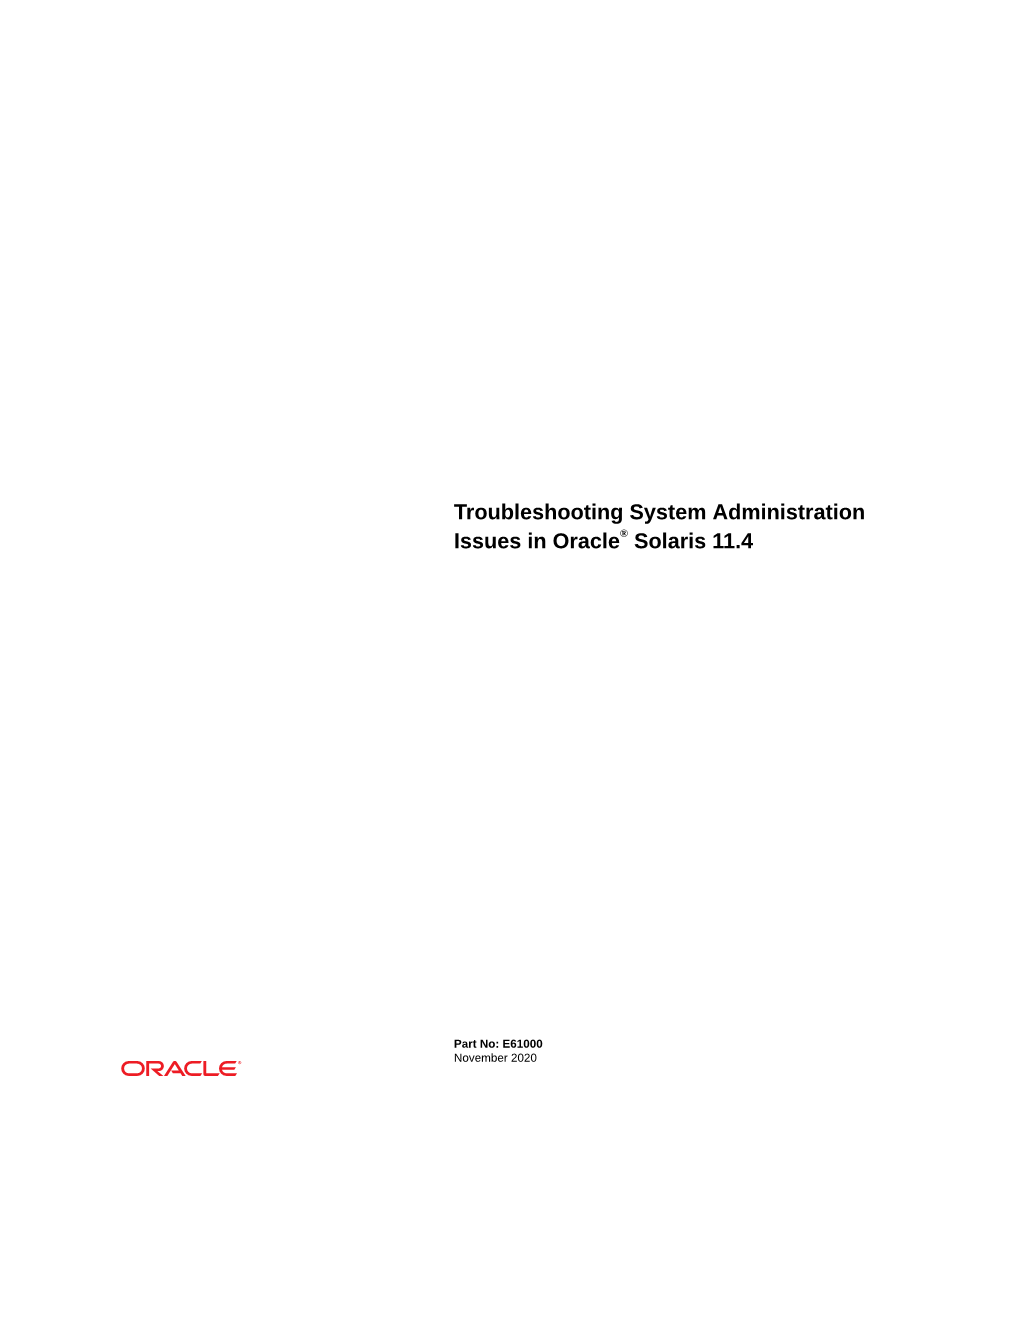 Troubleshooting System Administration Issues in Oracle® Solaris 11.4